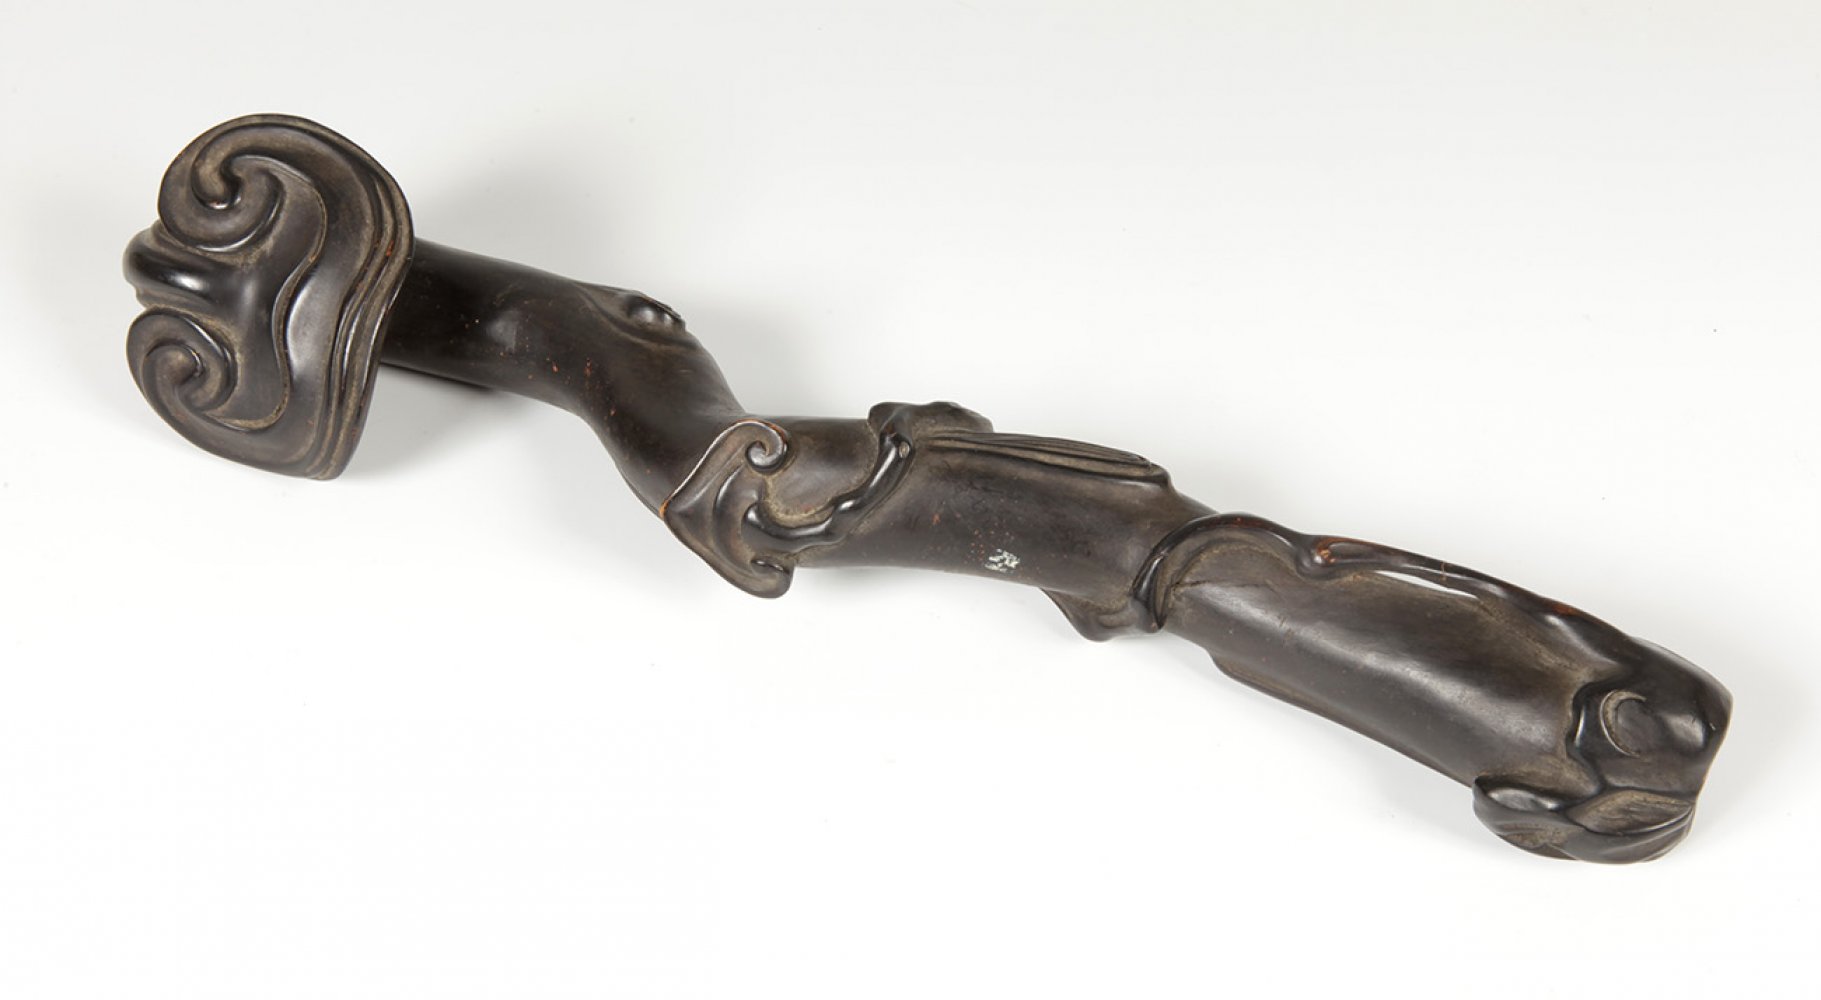 Ruyi sceptre; Liaoning, China, 19th century.Carved wood.Measurements: 37 cm long.This type of